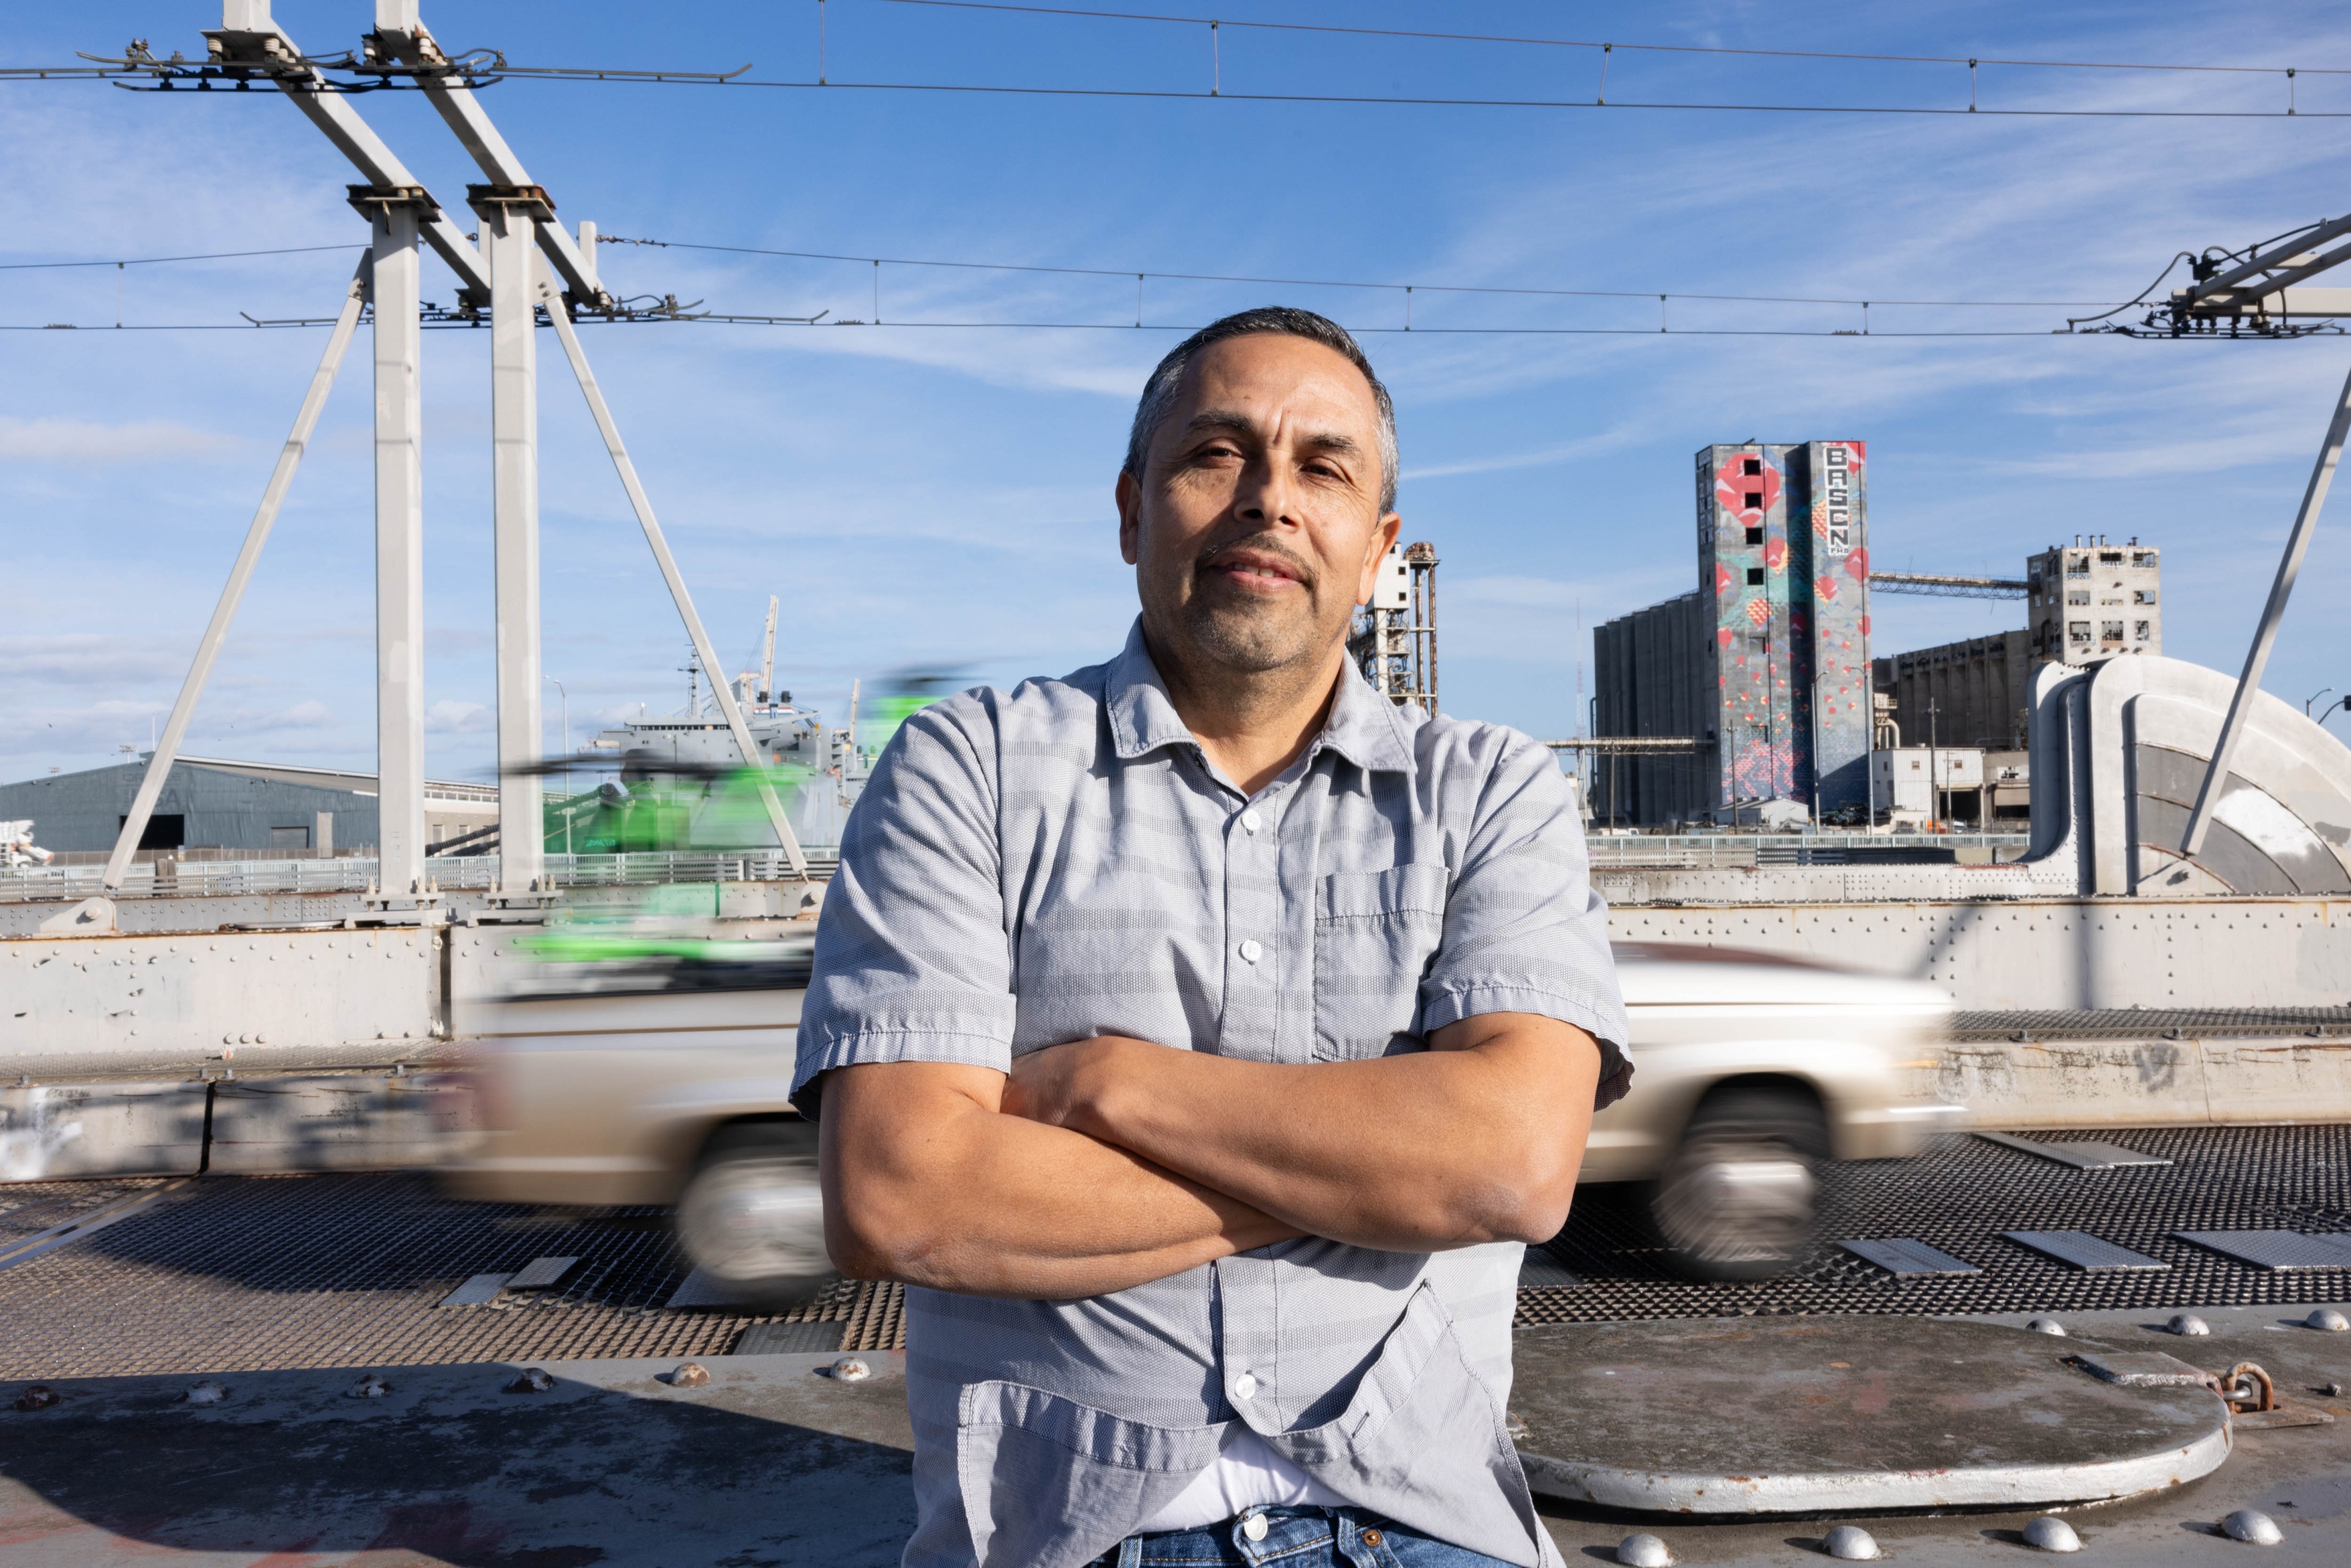 A man Ray Guerrero stands on the Islais Creek Bridge facing the camera while posing for a portrait.